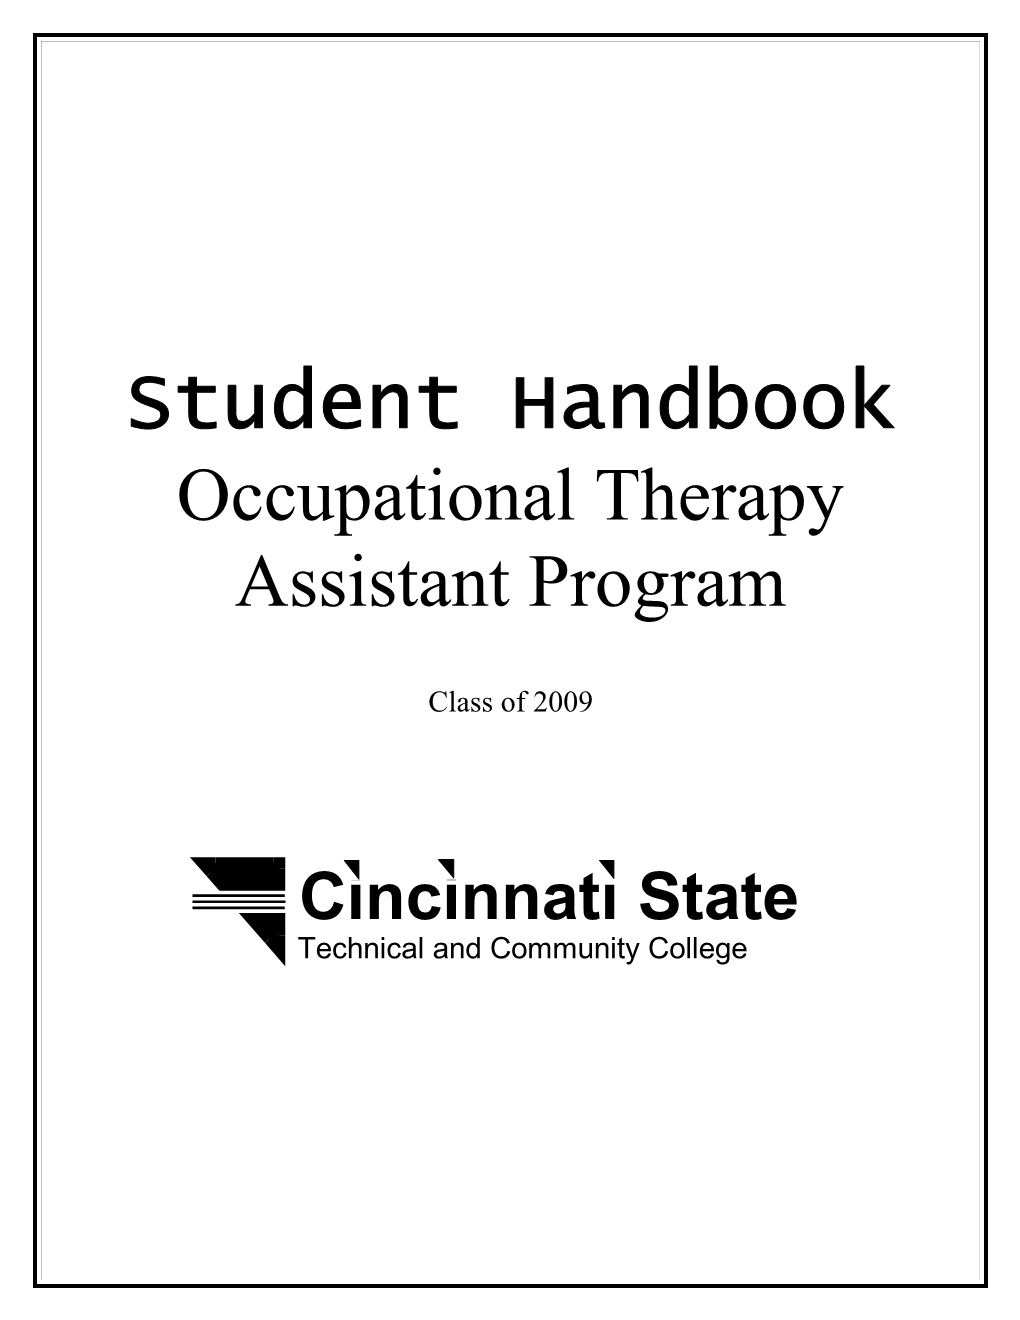 Dear Occupational Therapy Assistant Student